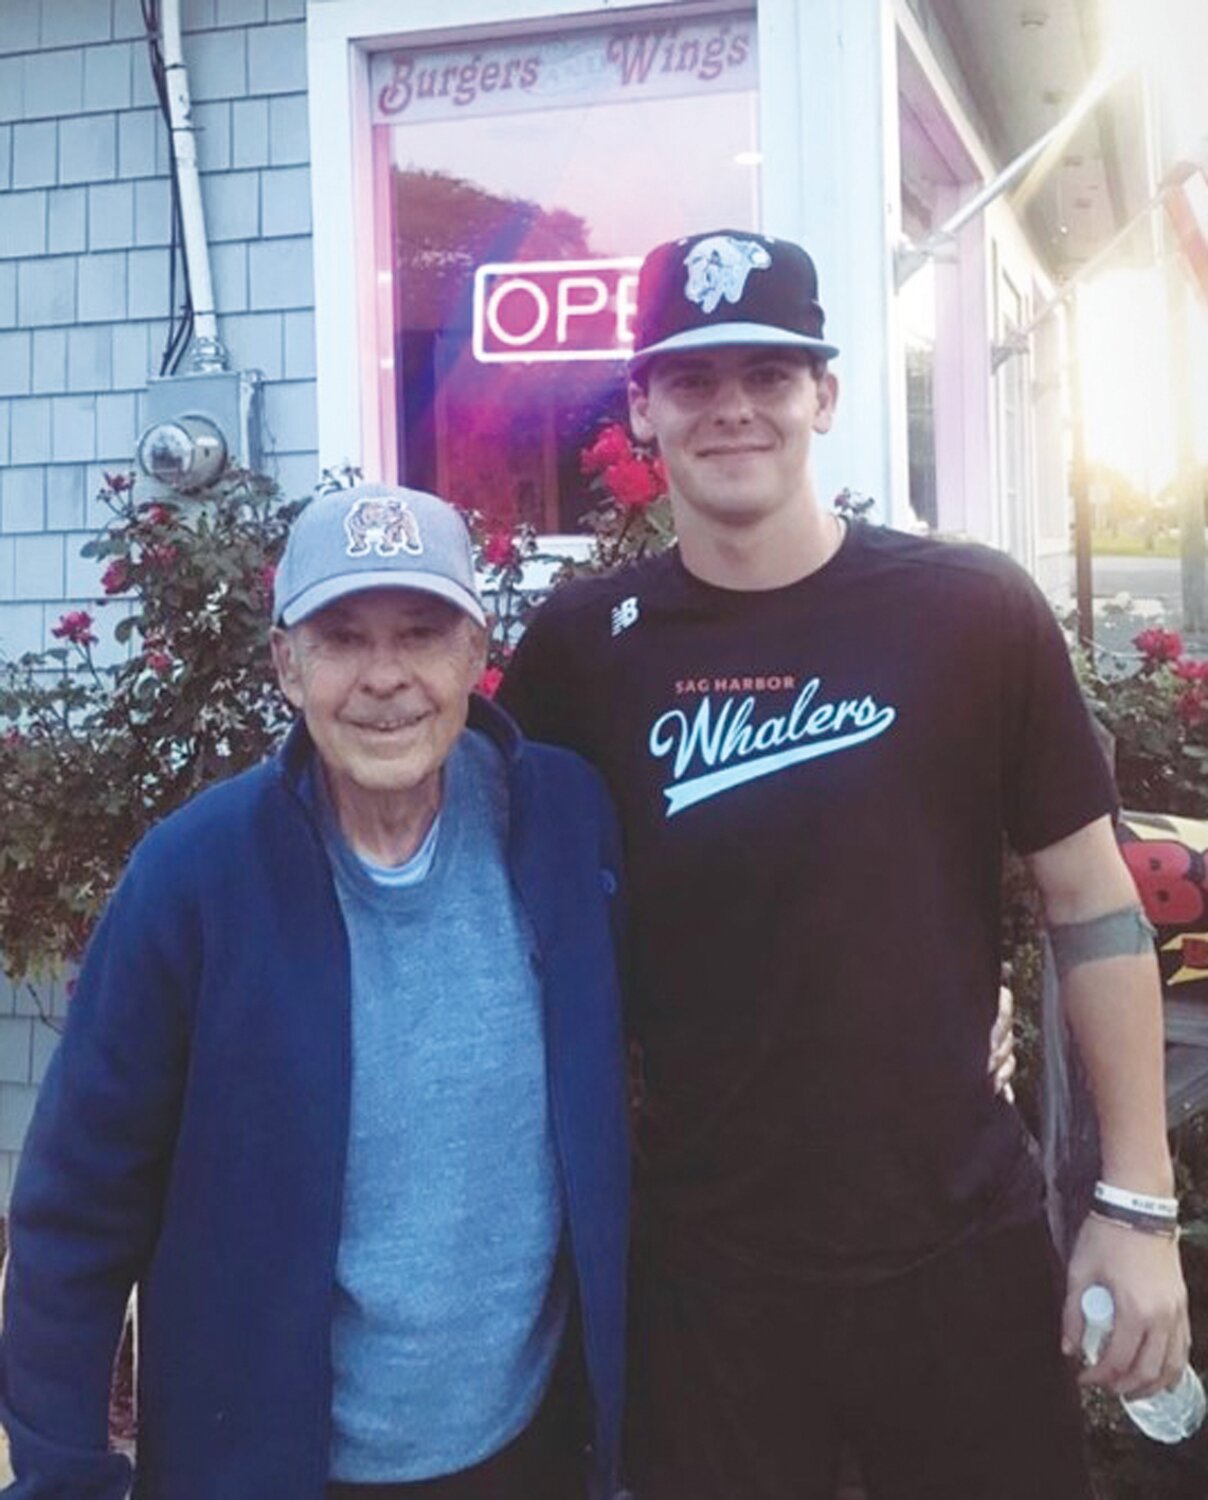 PROUD GRANDFATHER: Warwick native Matt Woods along with his grandfather and local baseball legend Don Mezzanotte over the years. “My grandfather was my first baseball coach; my role model and my best friend – all in one person,”  said Woods of Mezzanotte, who passed away in 2020. Woods is currently playing for Maryland is hoping to hear his name called in the upcoming MLB Draft. (Submitted photos)